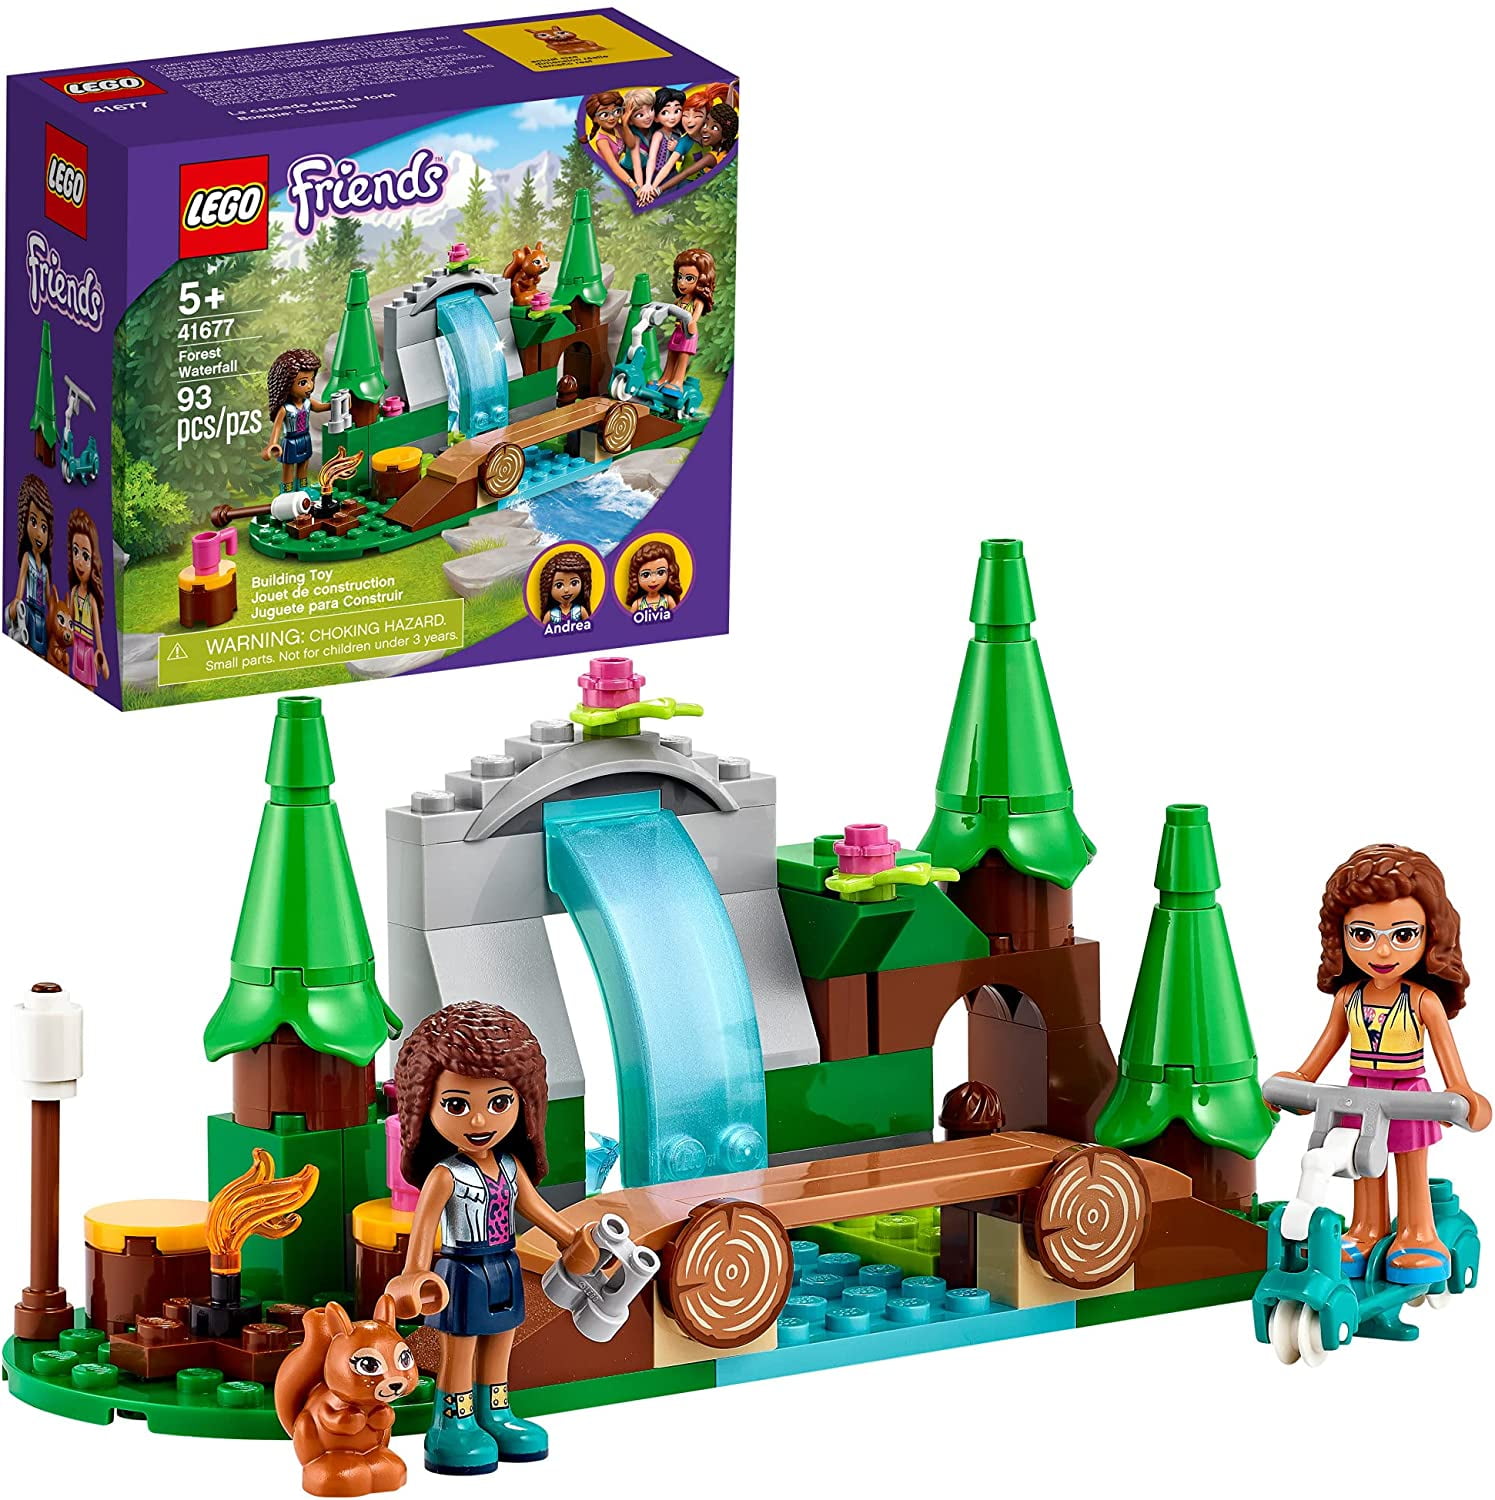 midnat Korean vinden er stærk LEGO Friends Forest Waterfall 41677 Building Kit; Includes a Squirrel Toy;  Ideal Gift for Kids Who Love Nature Toys; New 2021 (93 Pieces) - Walmart.com